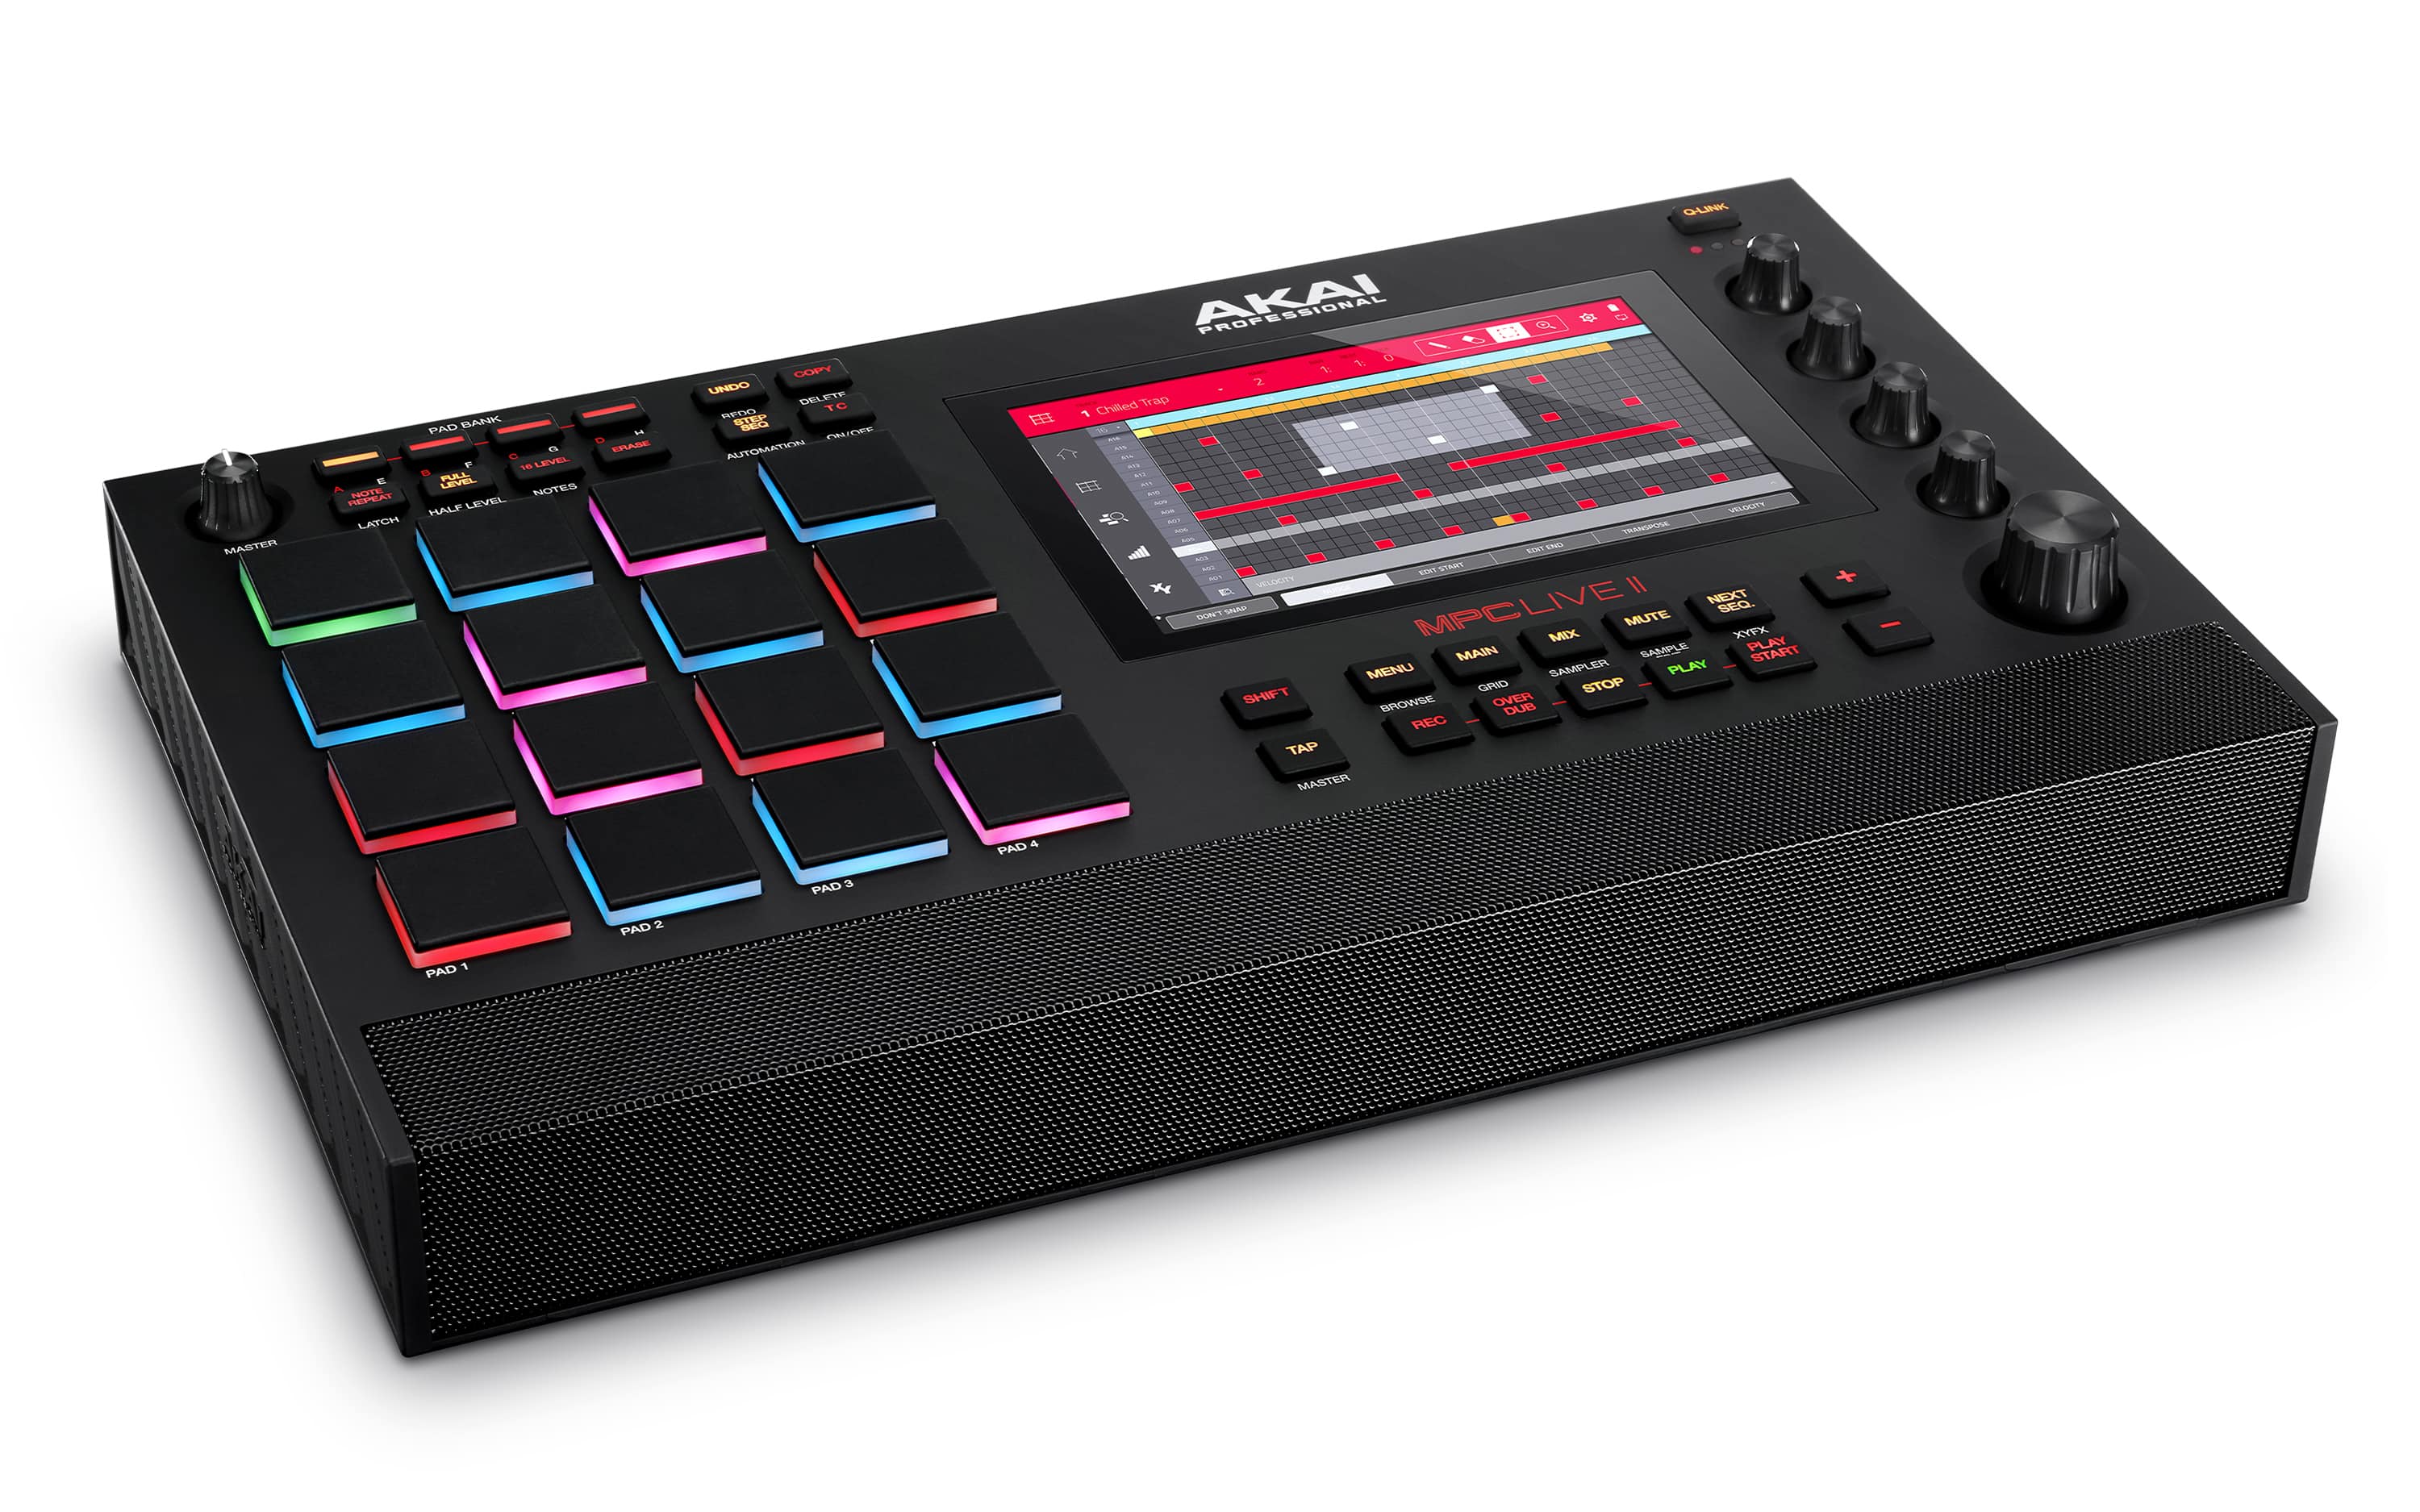 Akai Professional® Introduces MPC LIVE II – The First MPC With Built-In Stereo Monitors